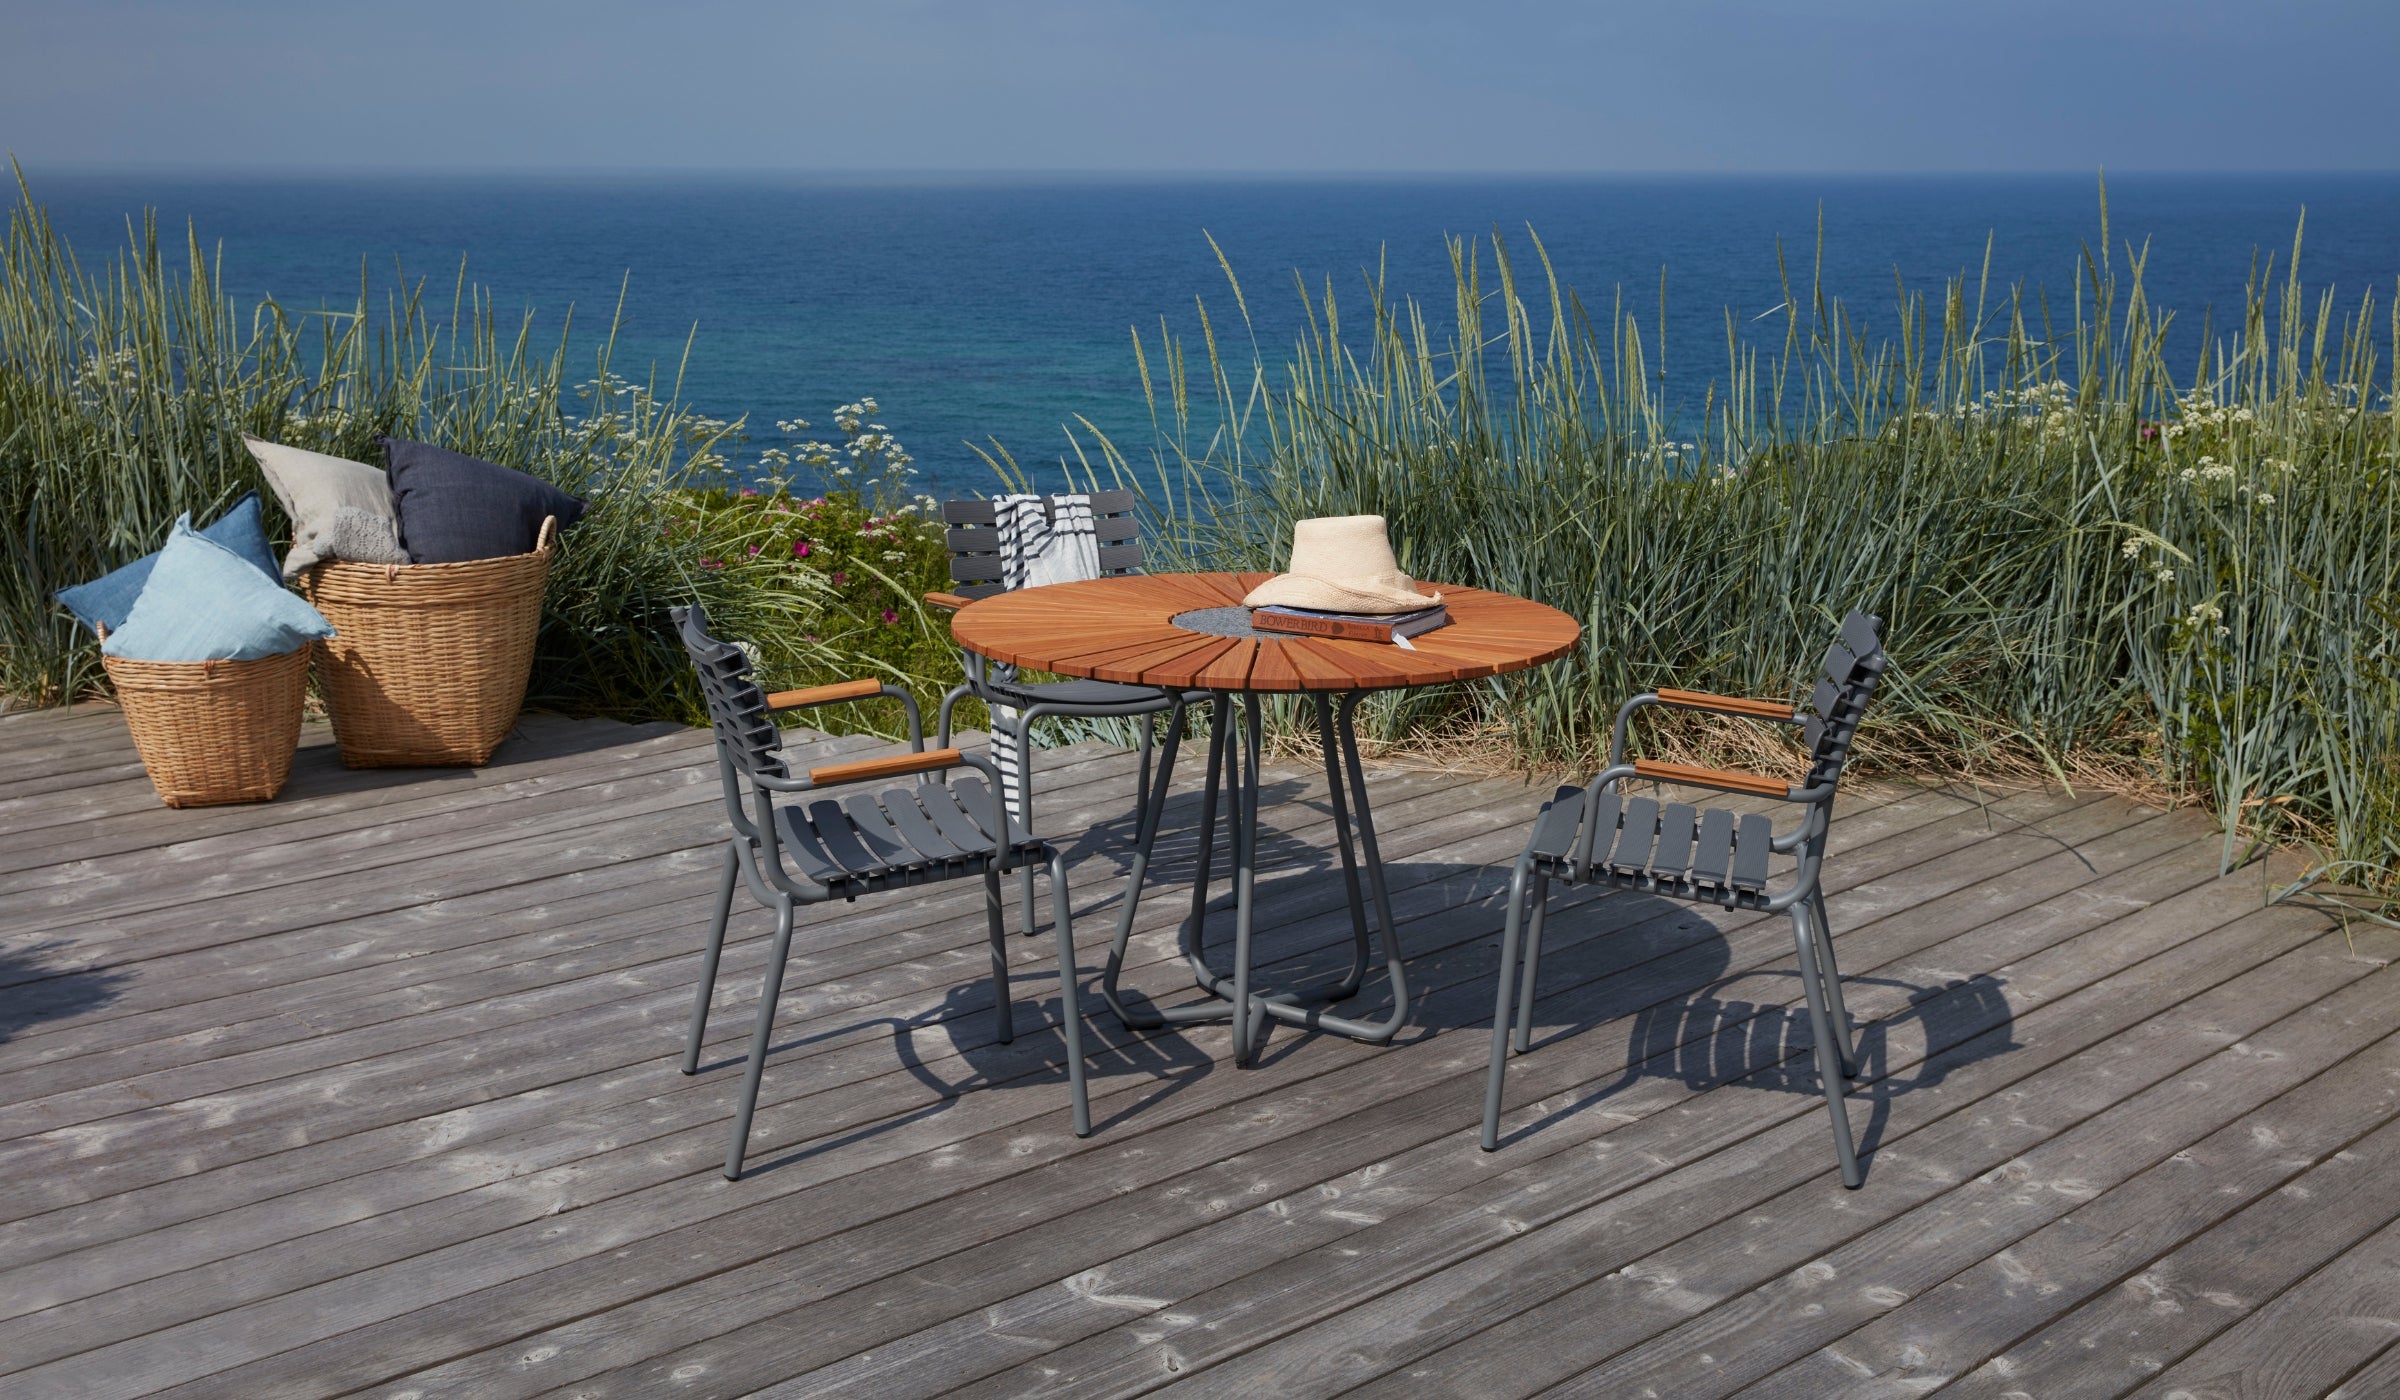 Reclips - Outdoor chair in aluminum and recycled plastic with bamboo armrests, gray